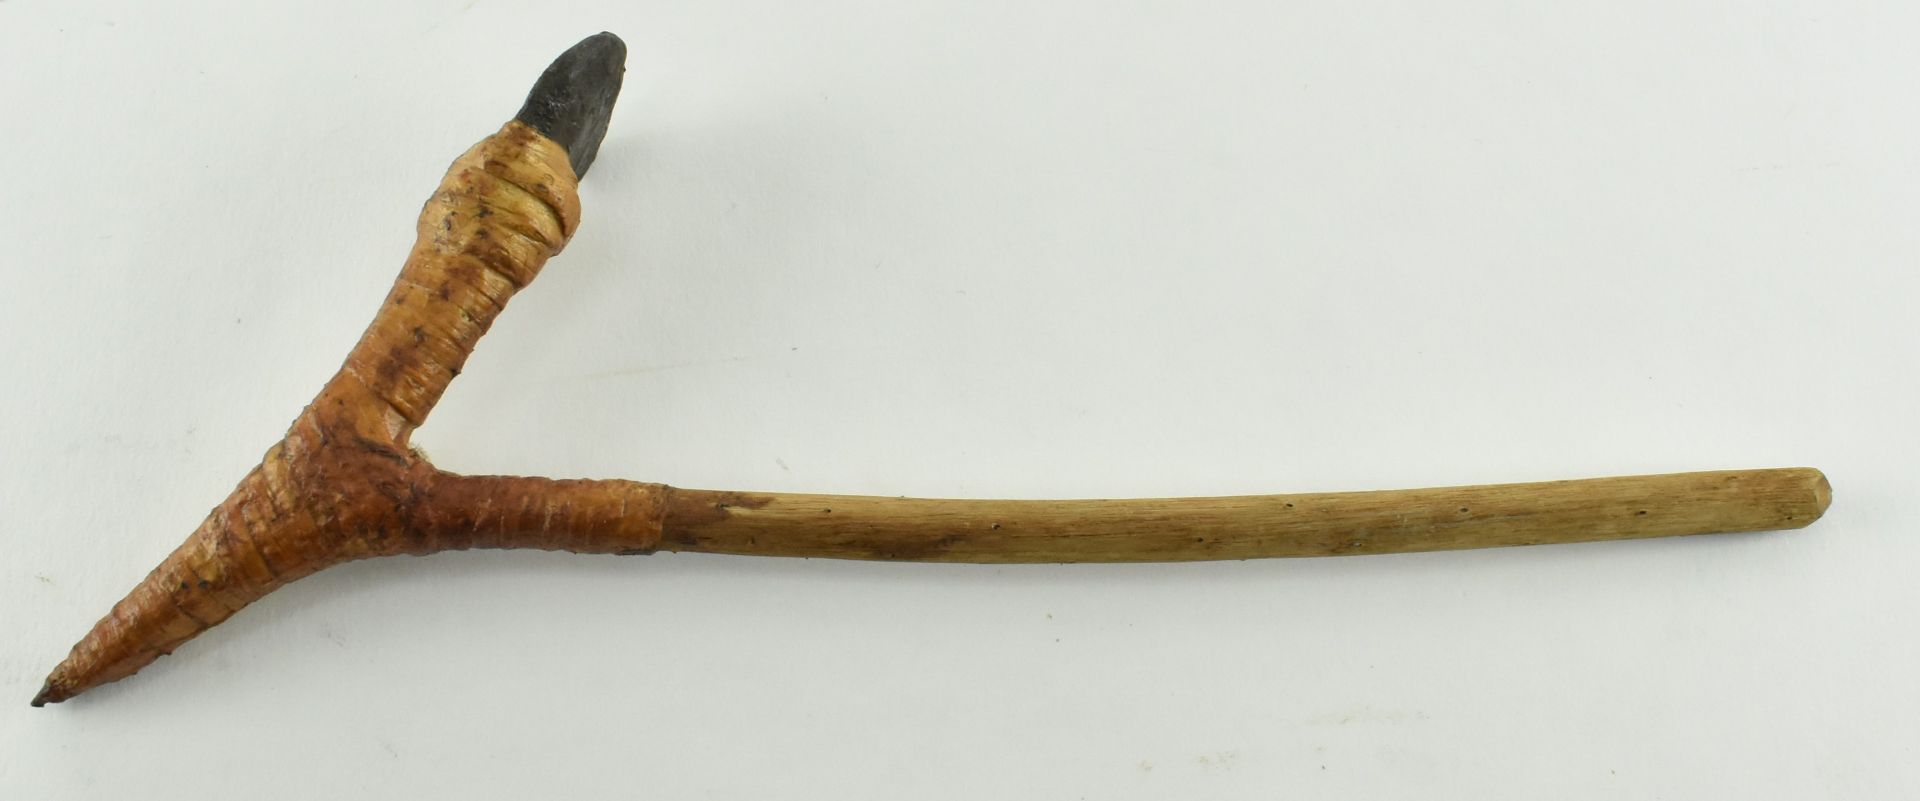 PAPUA NEW GUINEA TRIBAL ADZE AXE WITH STONE AXEHEAD - Image 5 of 5